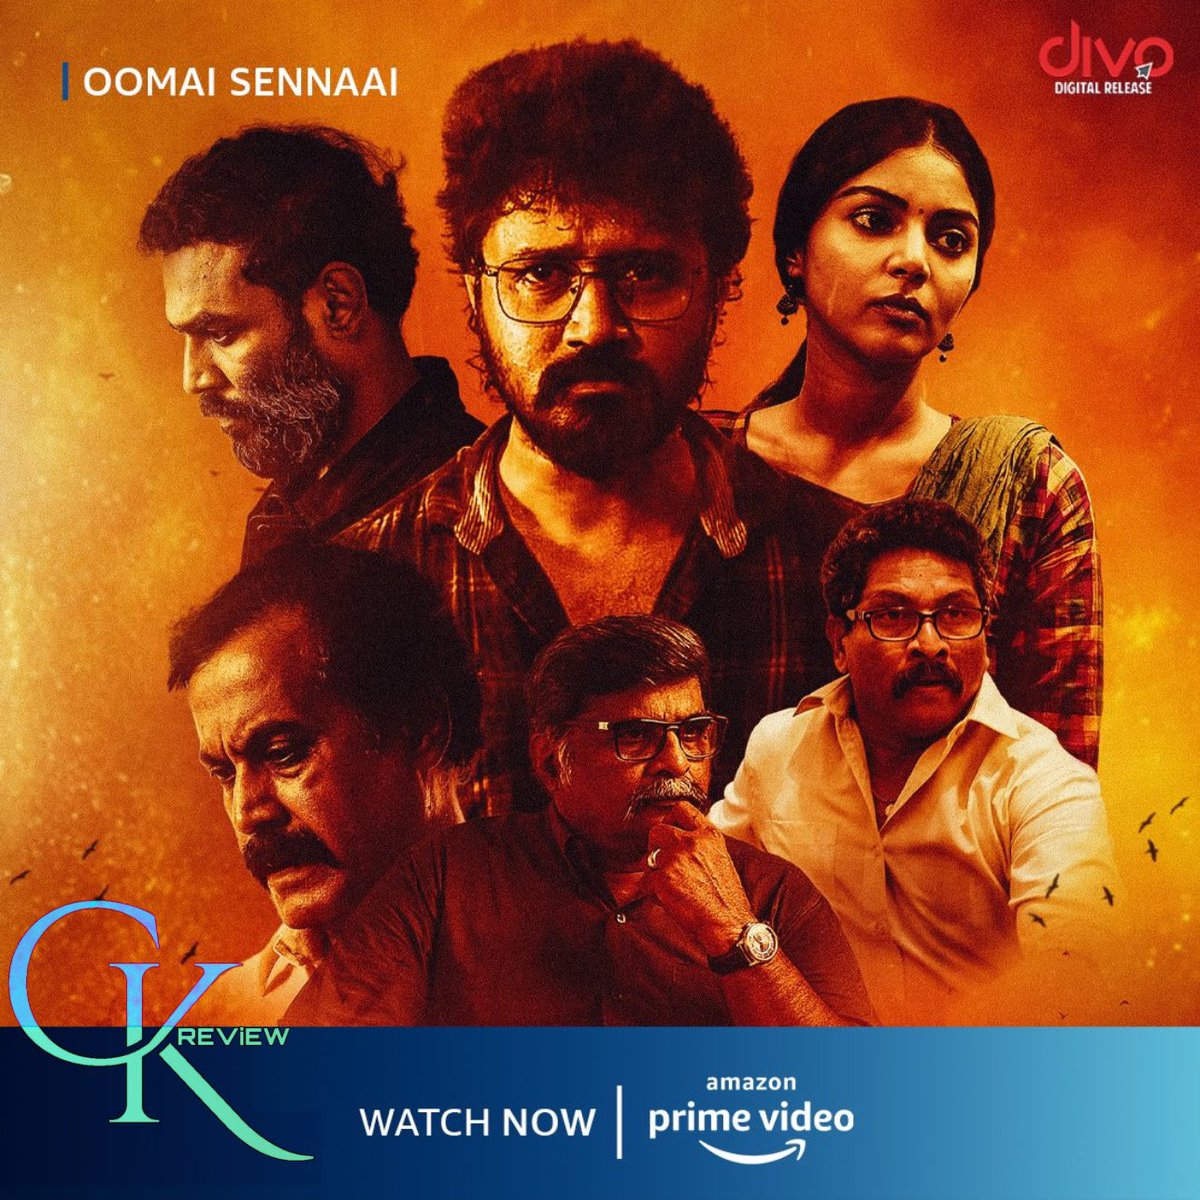 #OomaiSennaai (Tamil|2021) - AMAZON PRIME.

Starting few Mins create some curiosity, later it started moving on Snail pace with unexciting scenes. Michael struggles to emote , Sanam No scope, Aroul D Shankar is gud. Technically its very poor. Making gives a short film vibe. BORE!